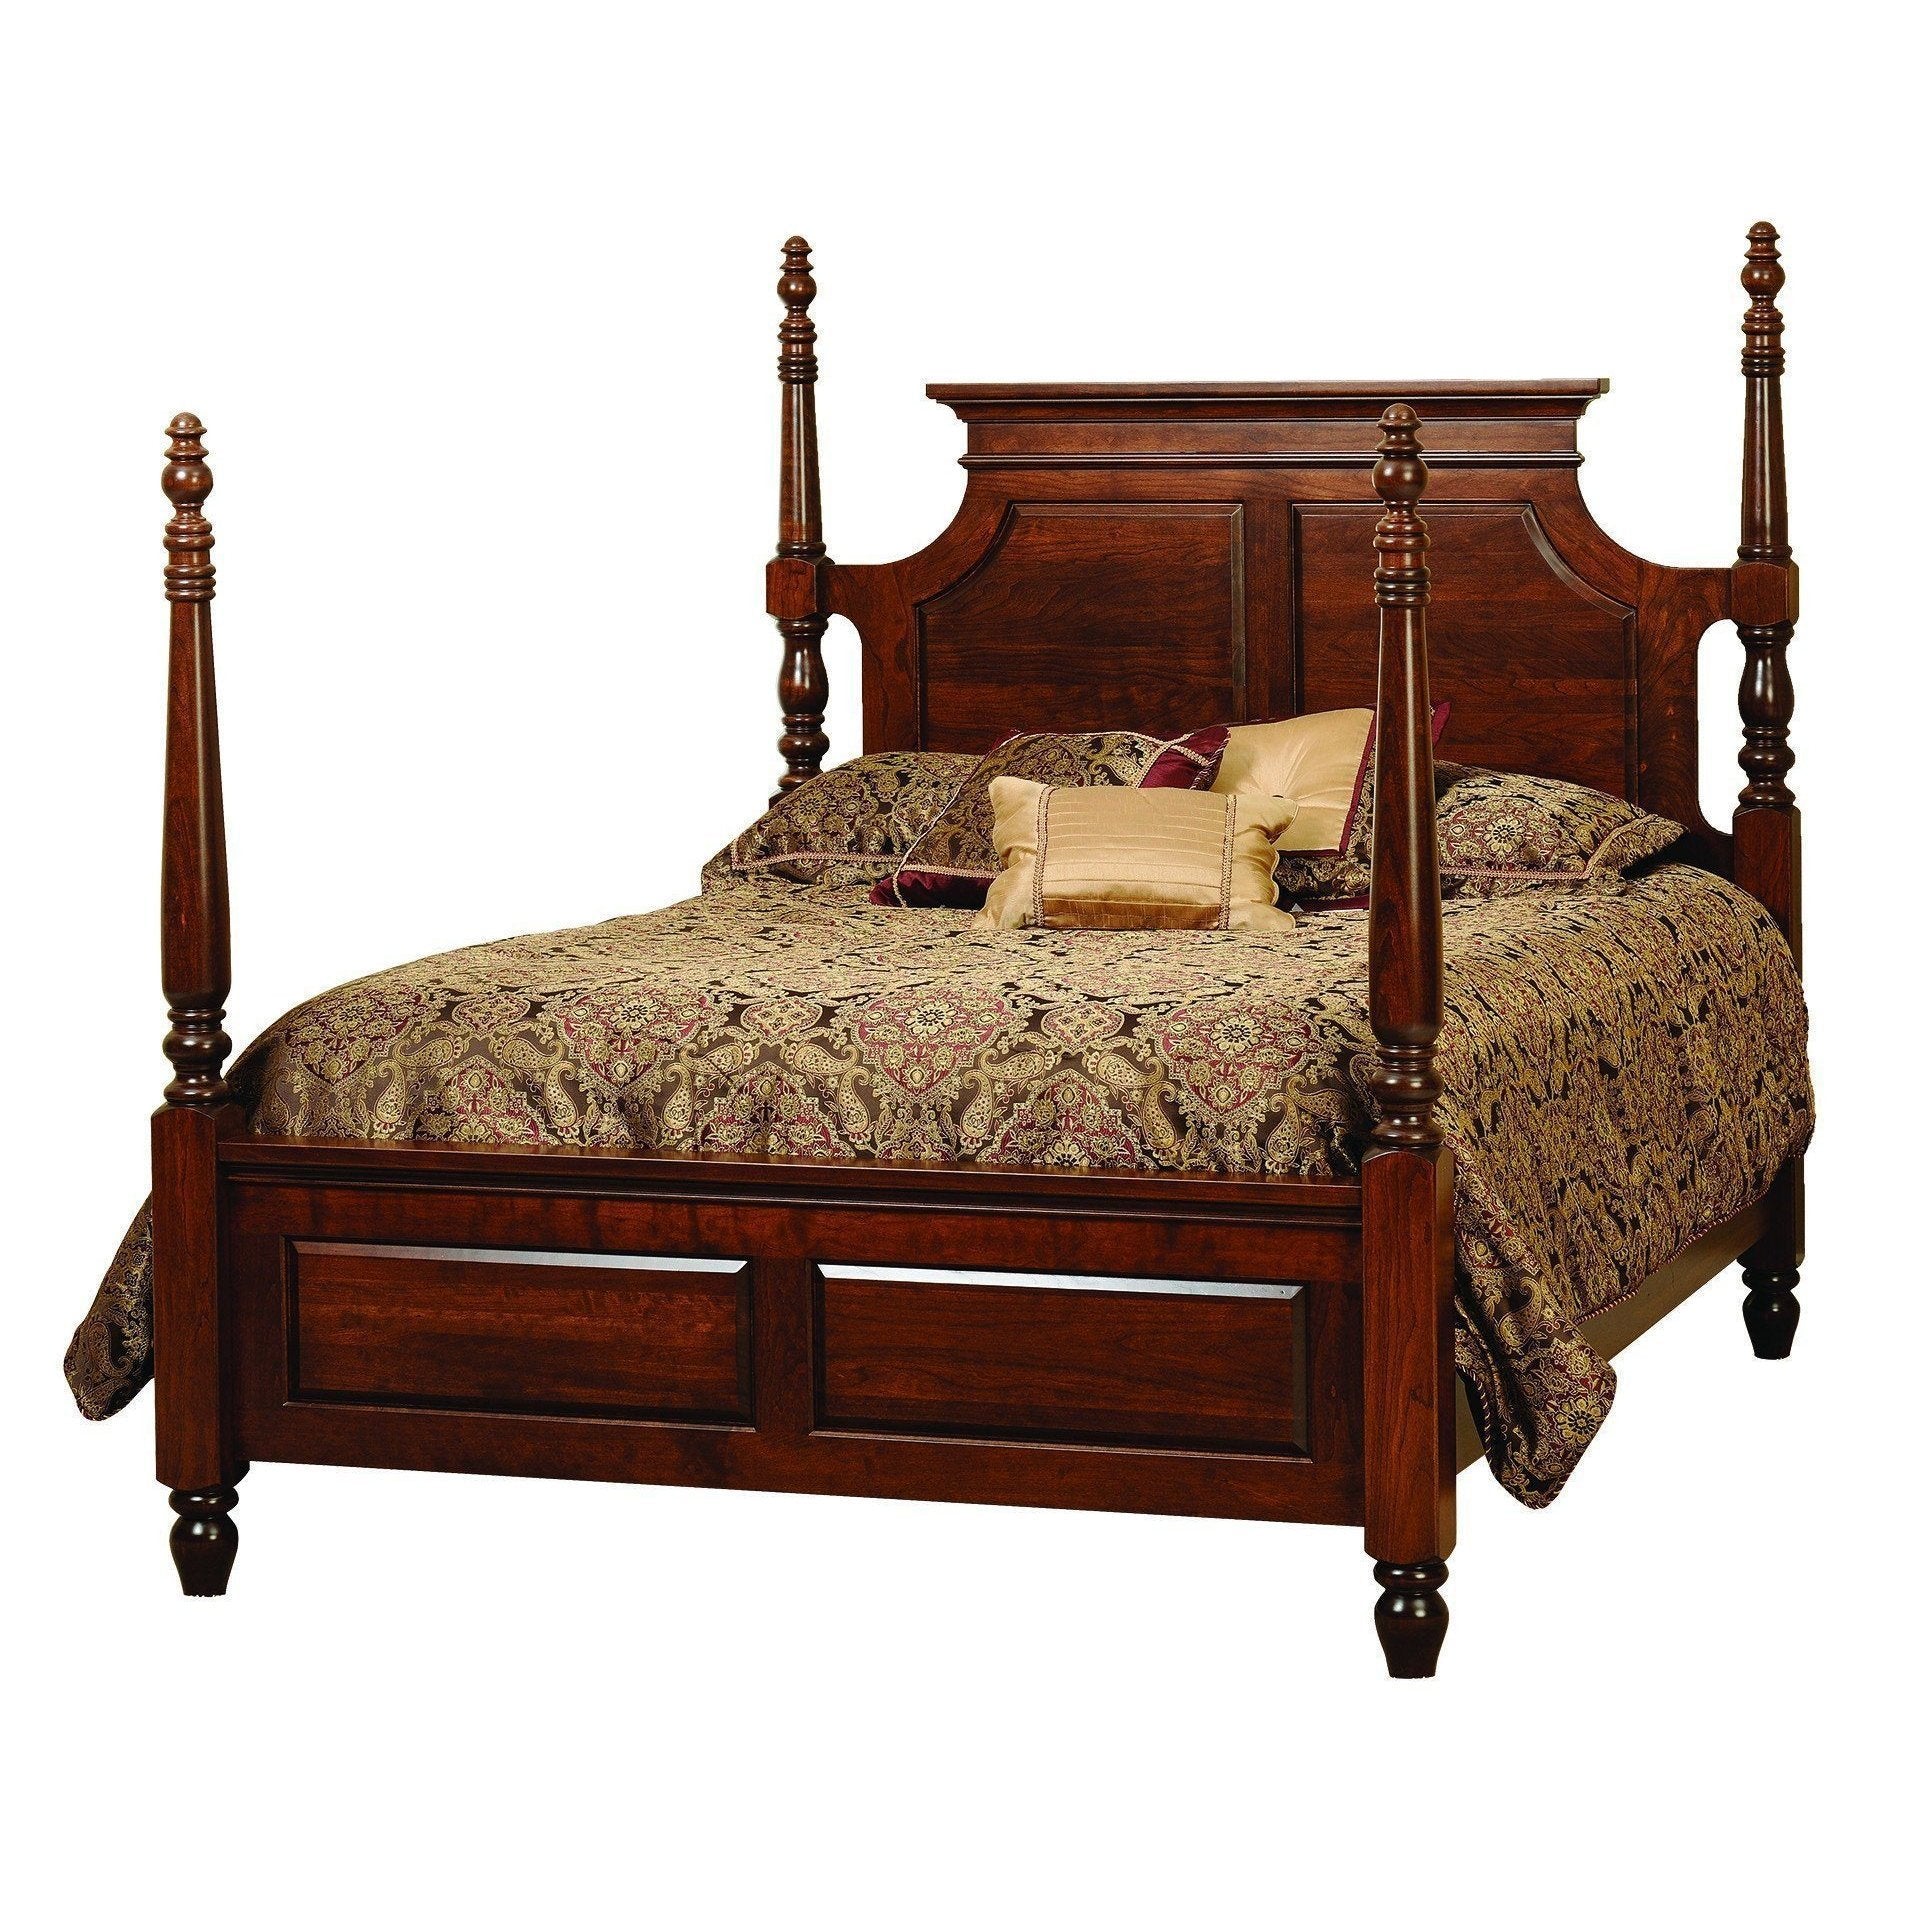 Wilkshire Bed-Bedroom-The Amish House